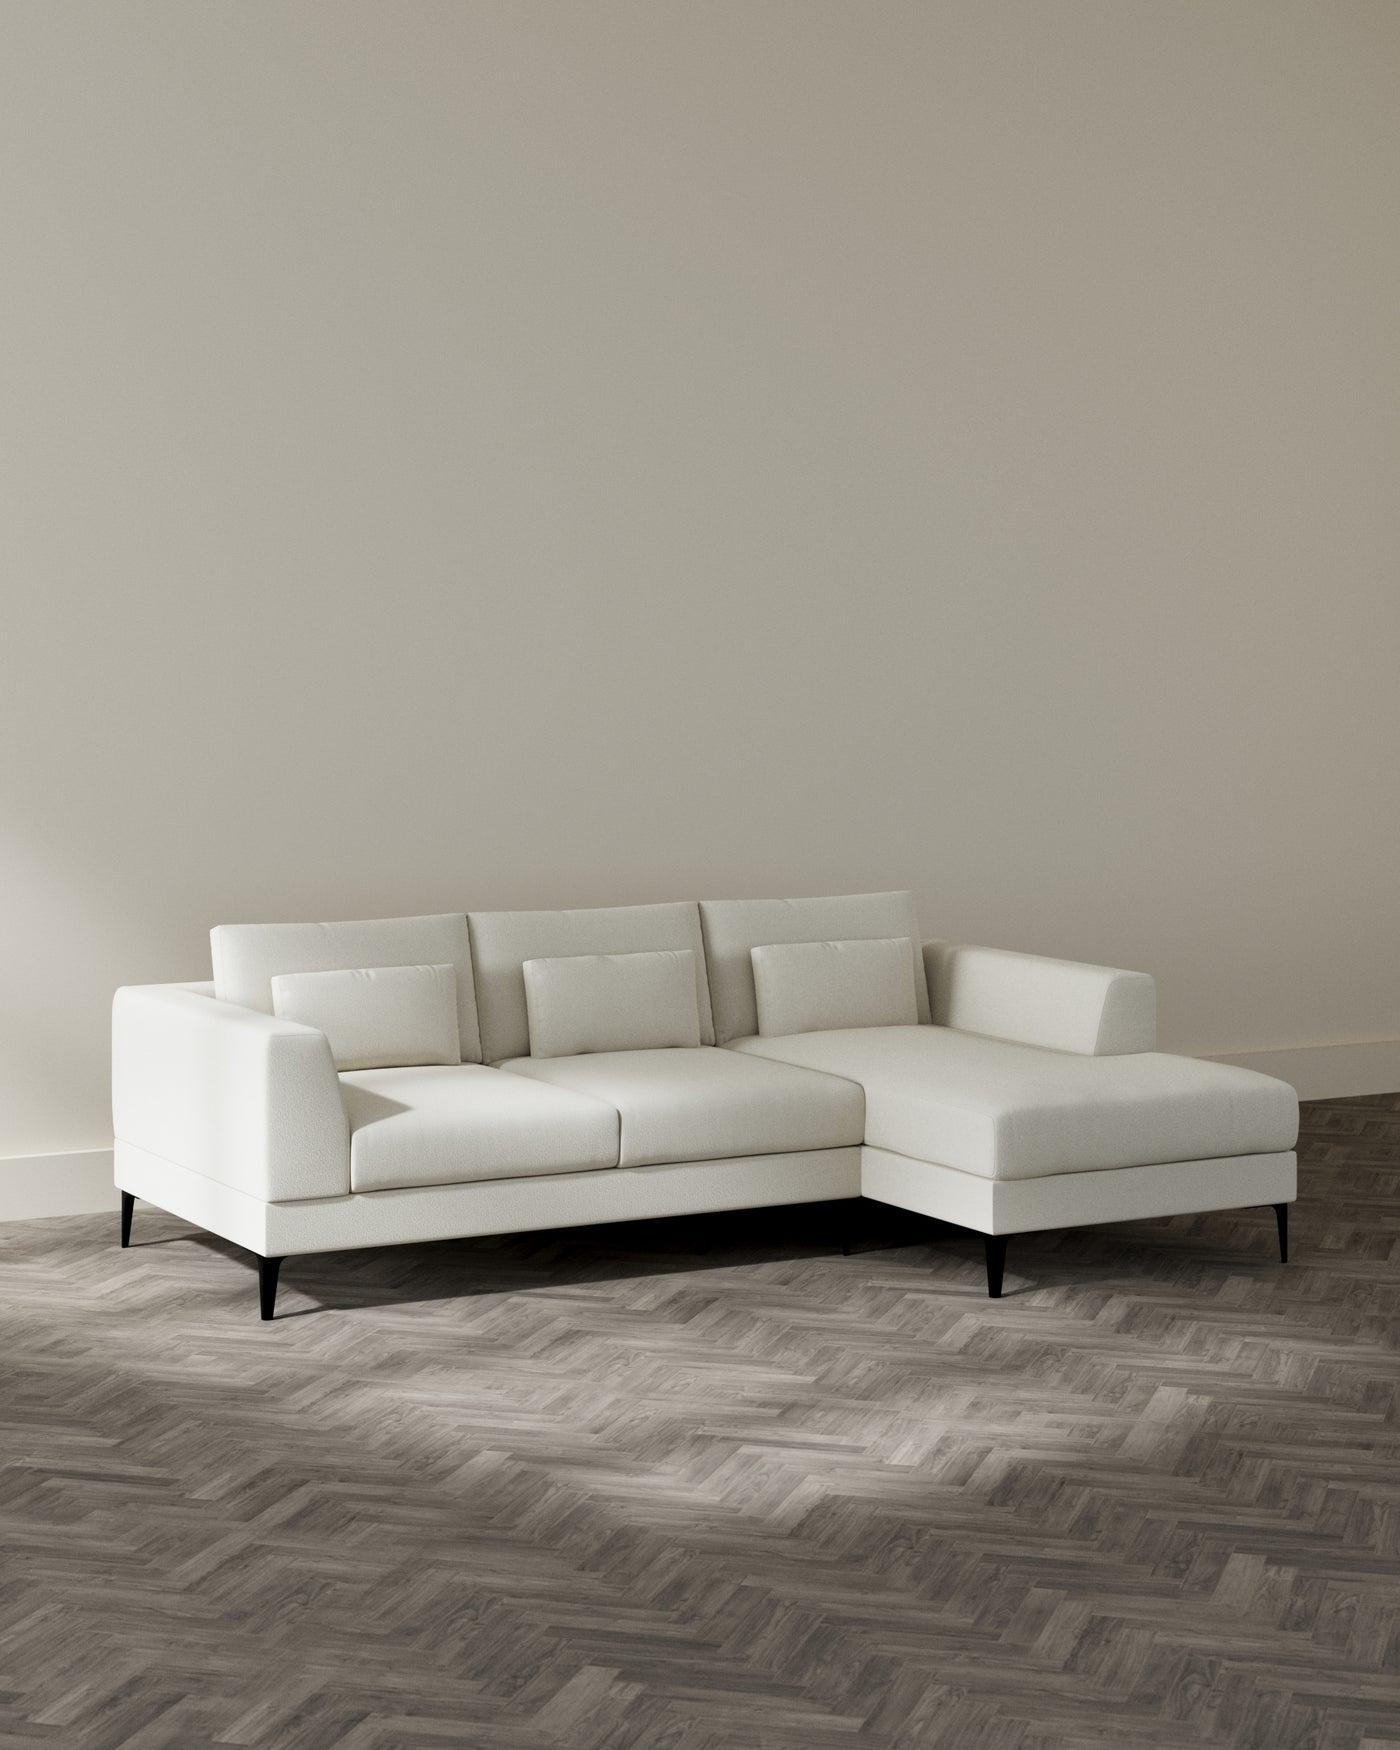 Modern L-shaped sectional sofa with a left-hand chaise lounge, upholstered in a light cream fabric, featuring clean lines, plush back cushions, and tapered black legs set against a neutral-toned wall and herringbone patterned wooden flooring.